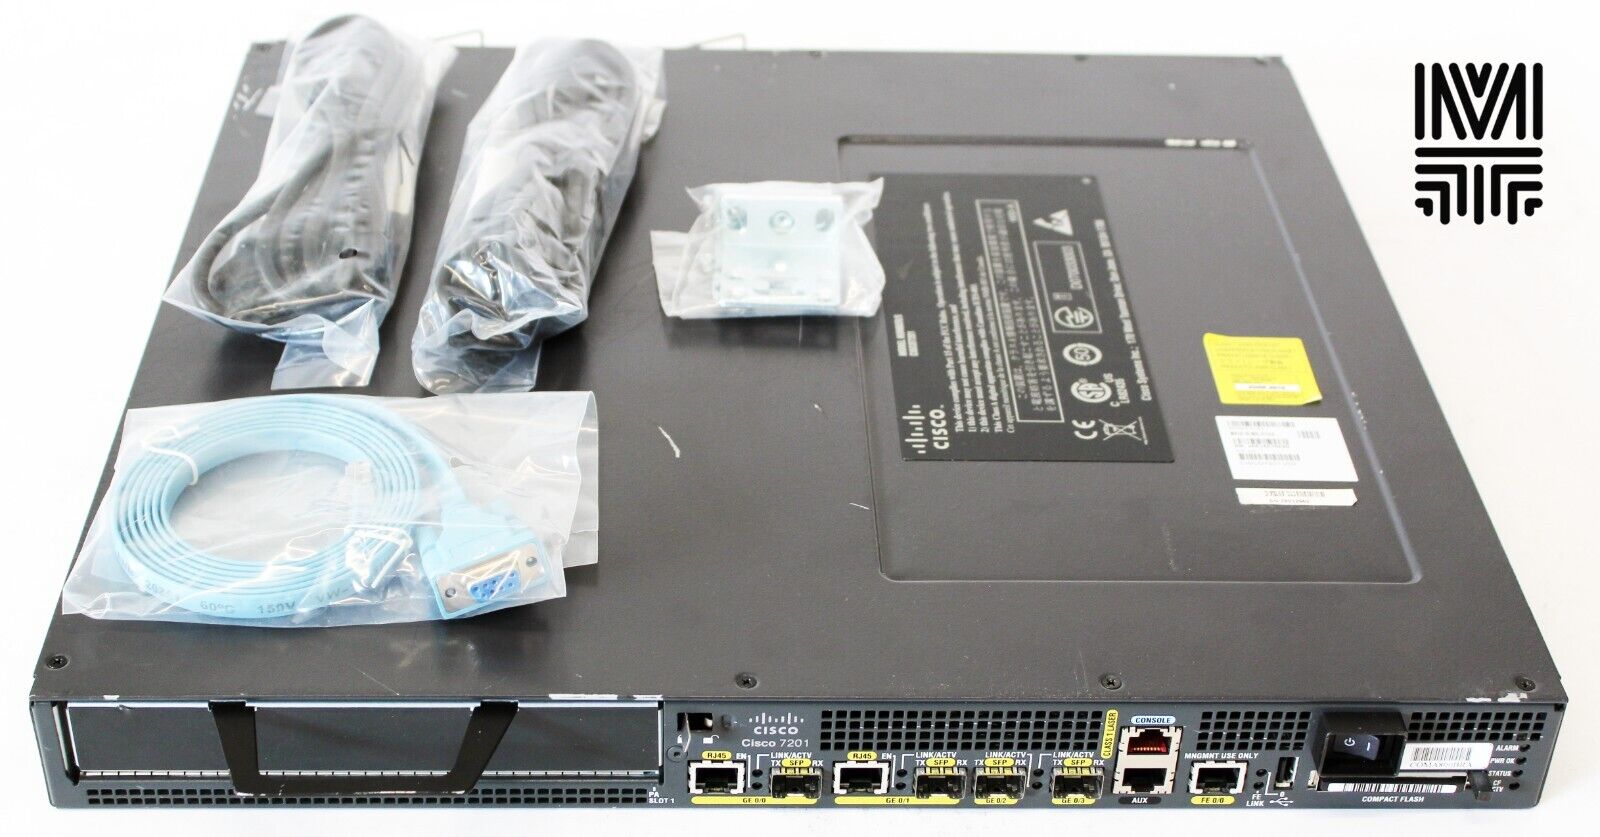 Cisco CISCO7201 Router 1GB Memory Dual Power Supply Gigabit Ethernet WAN Tested